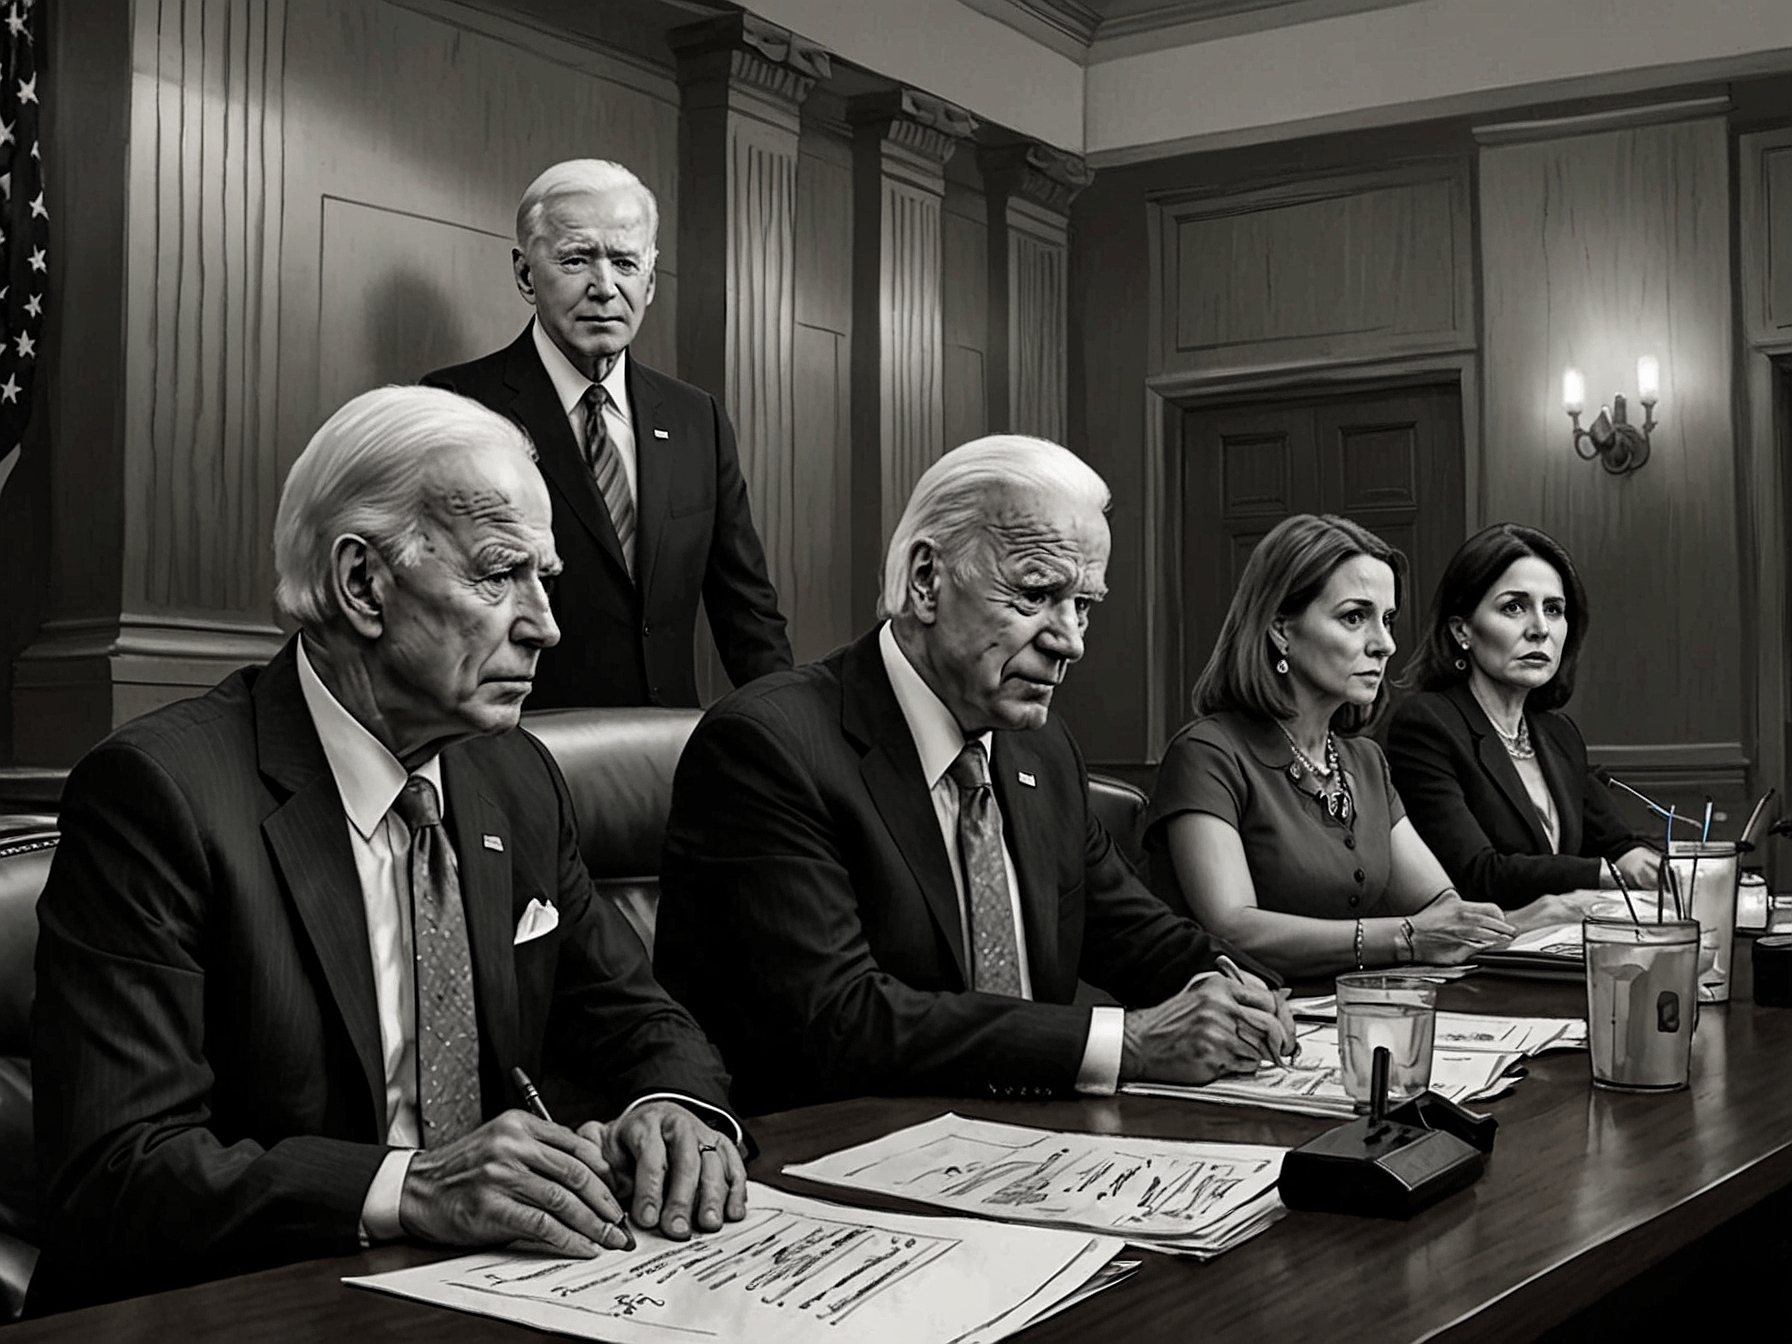 House Democrats in a meeting room displaying concerned expressions while discussing President Biden's recent debate performance and its implications for the 2024 presidential race.